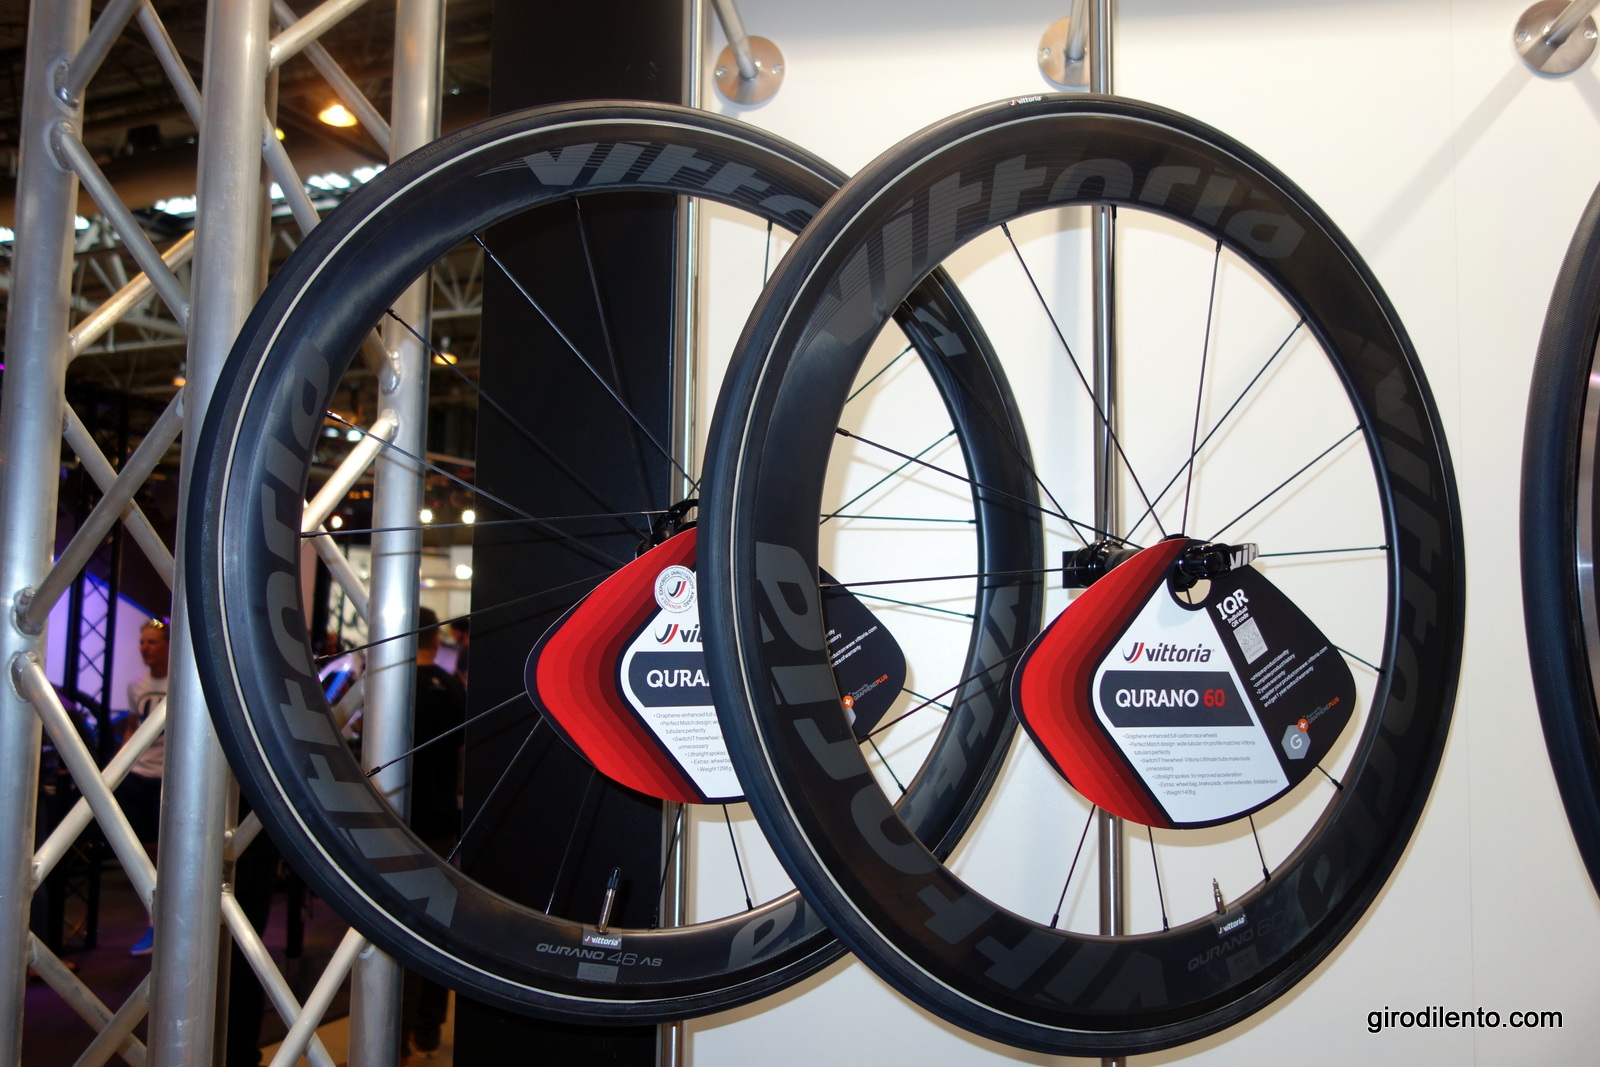 Here are some of the caron Vittoria wheels